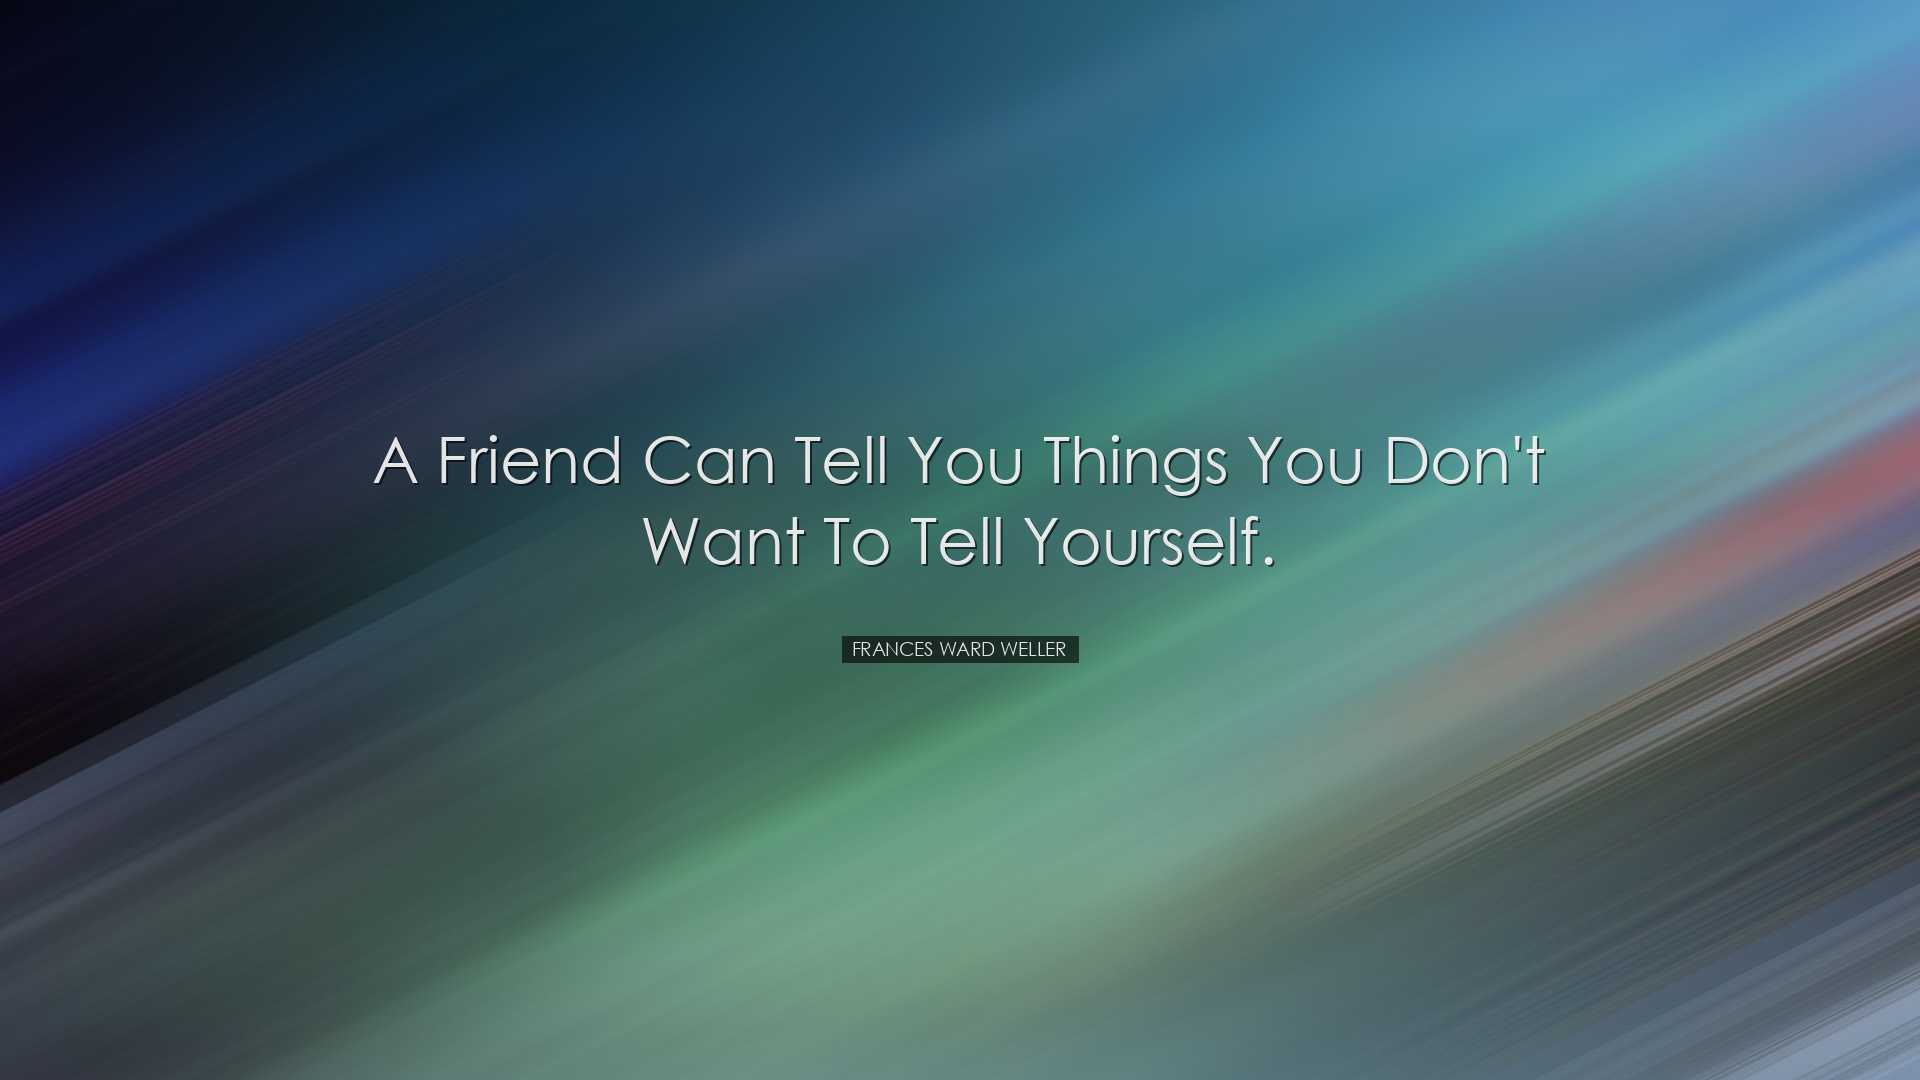 A friend can tell you things you don't want to tell yourself. - Fr